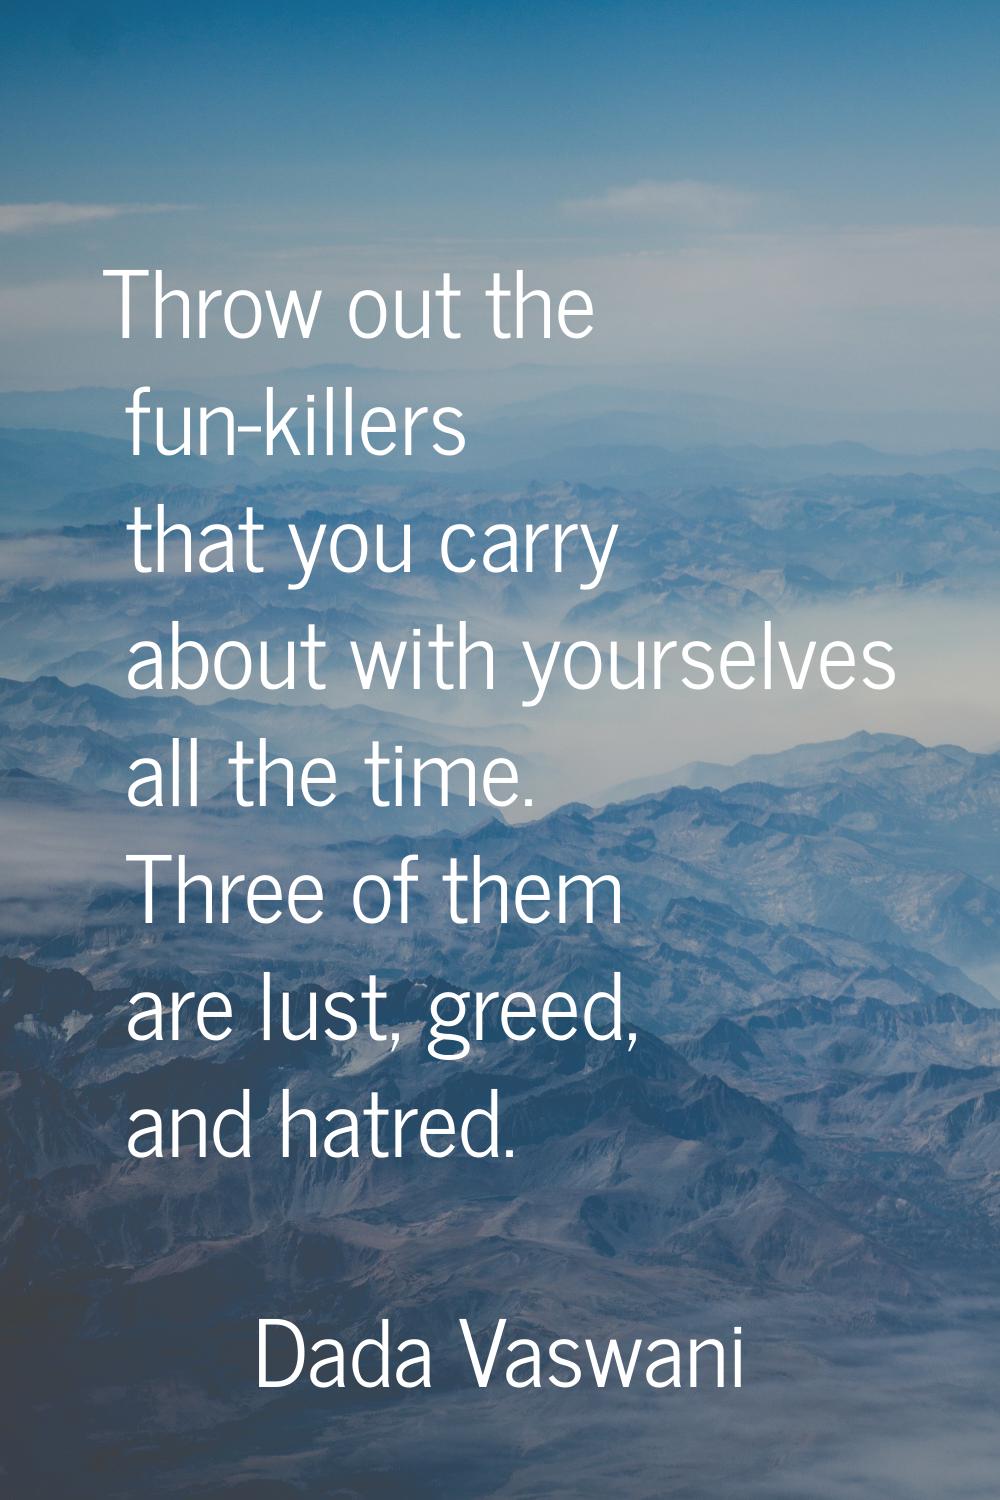 Throw out the fun-killers that you carry about with yourselves all the time. Three of them are lust